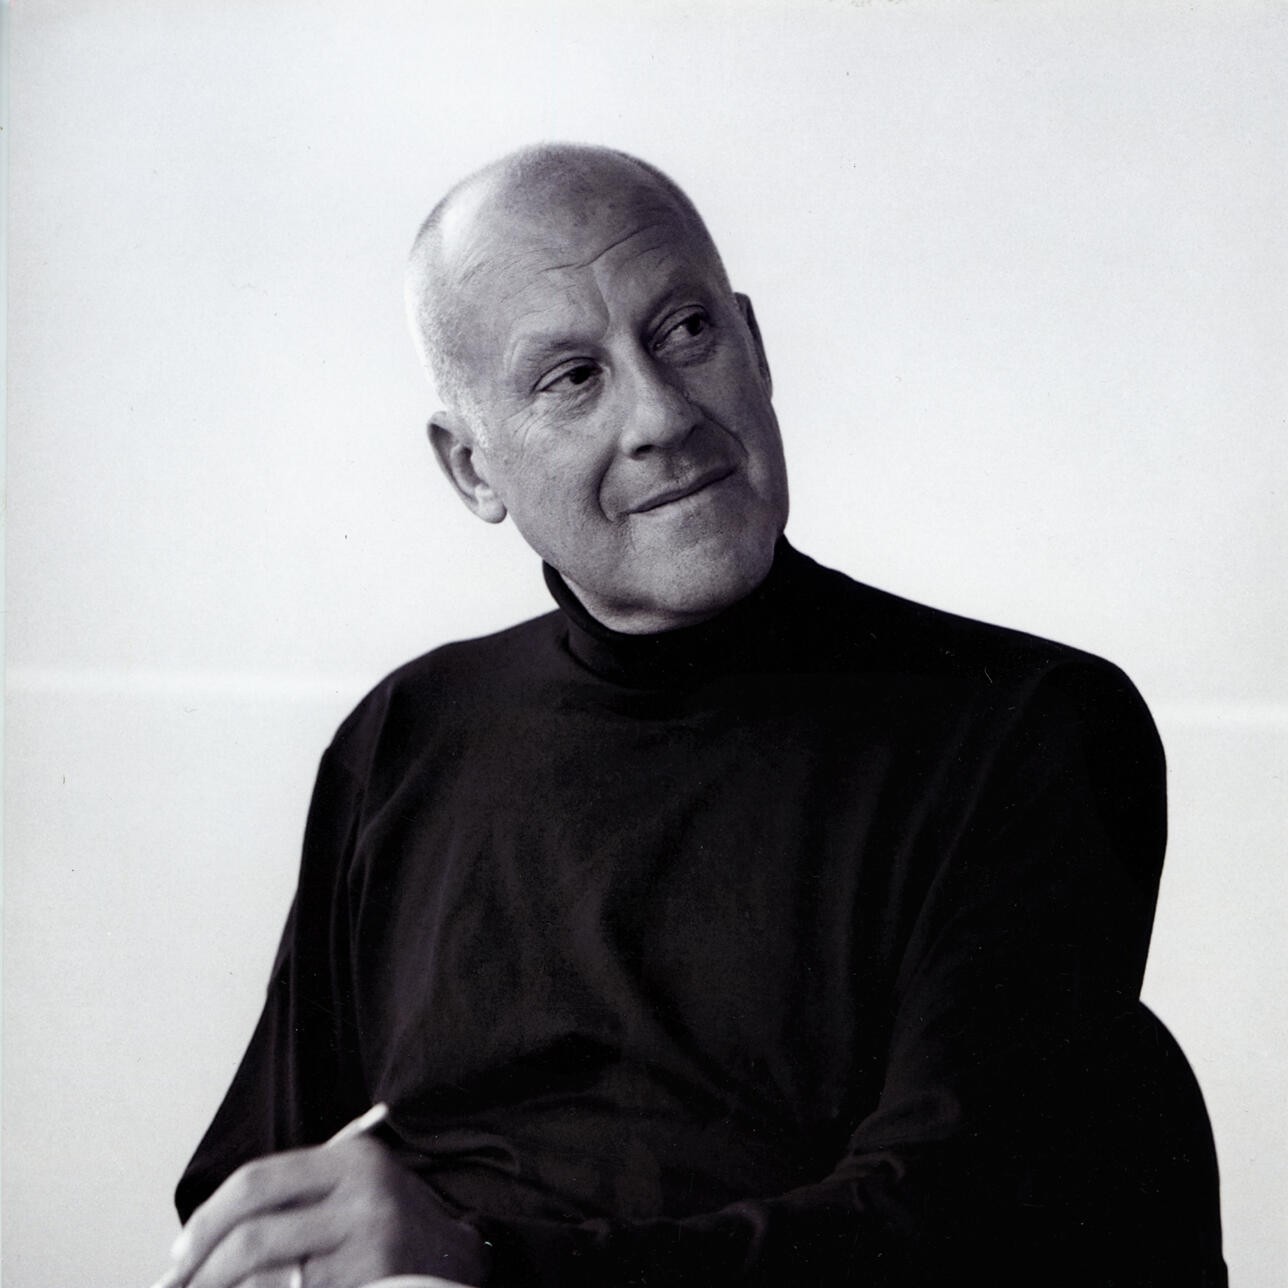 itw Norman Foster 2